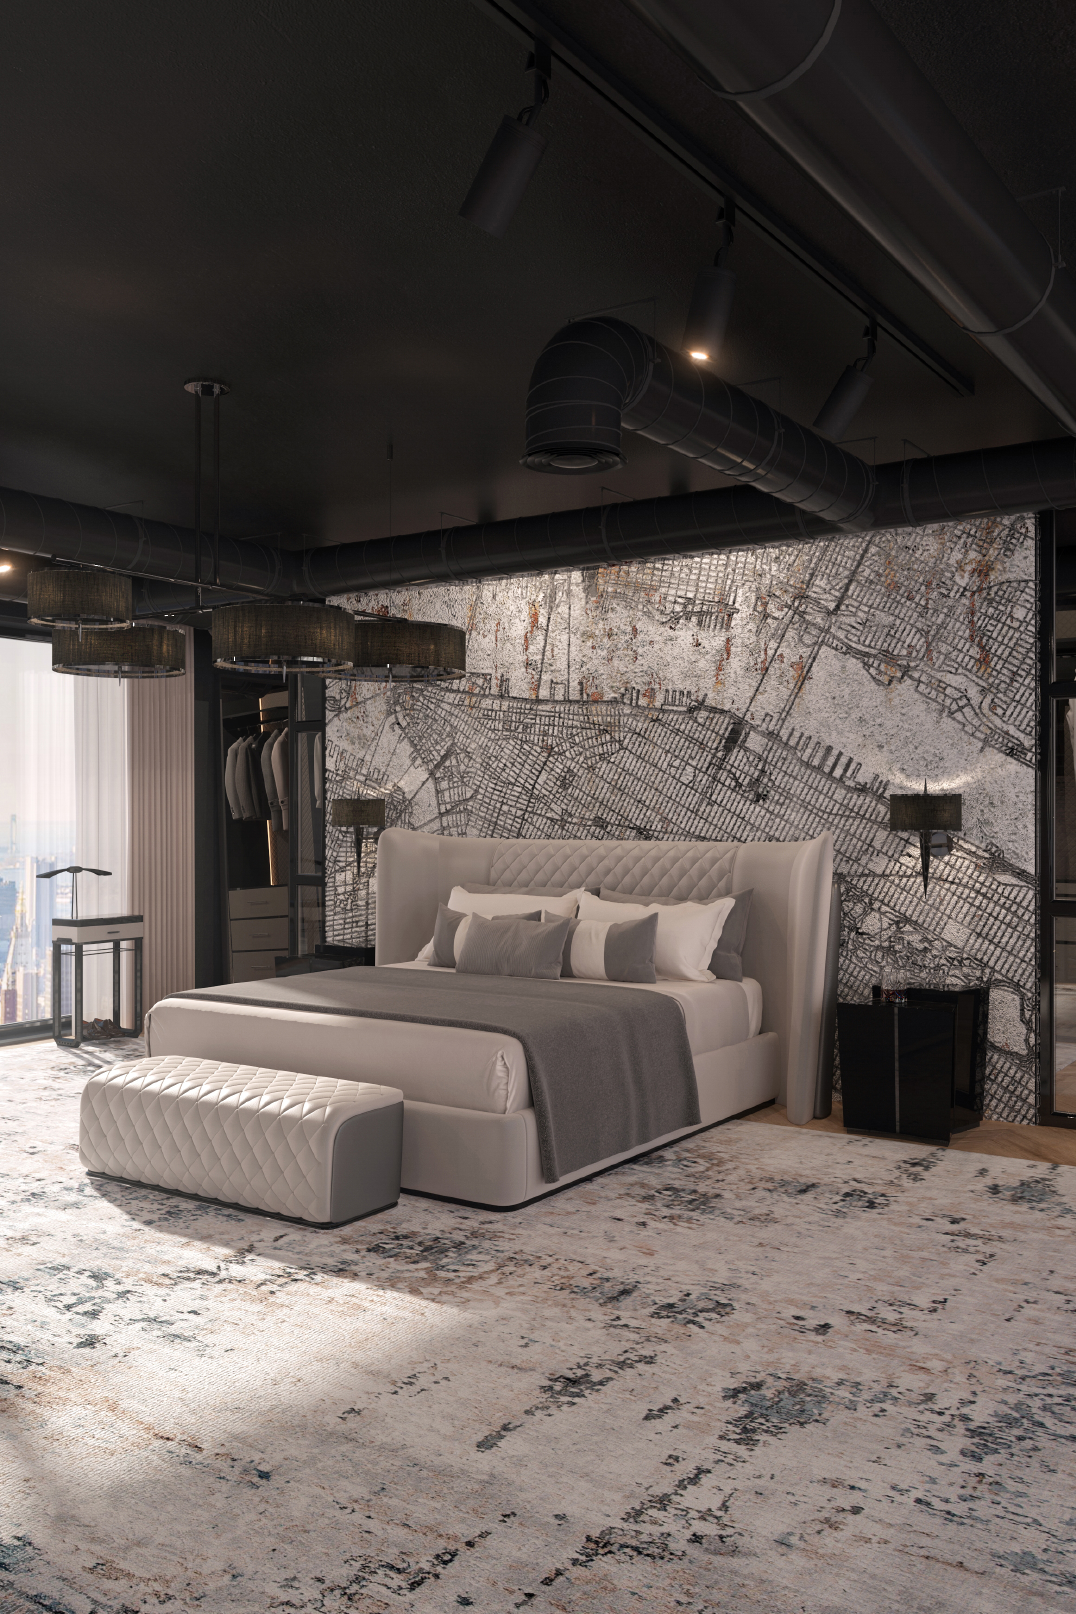 Inspiring Bedrooms: Luxury Furniture To Decor Your Home